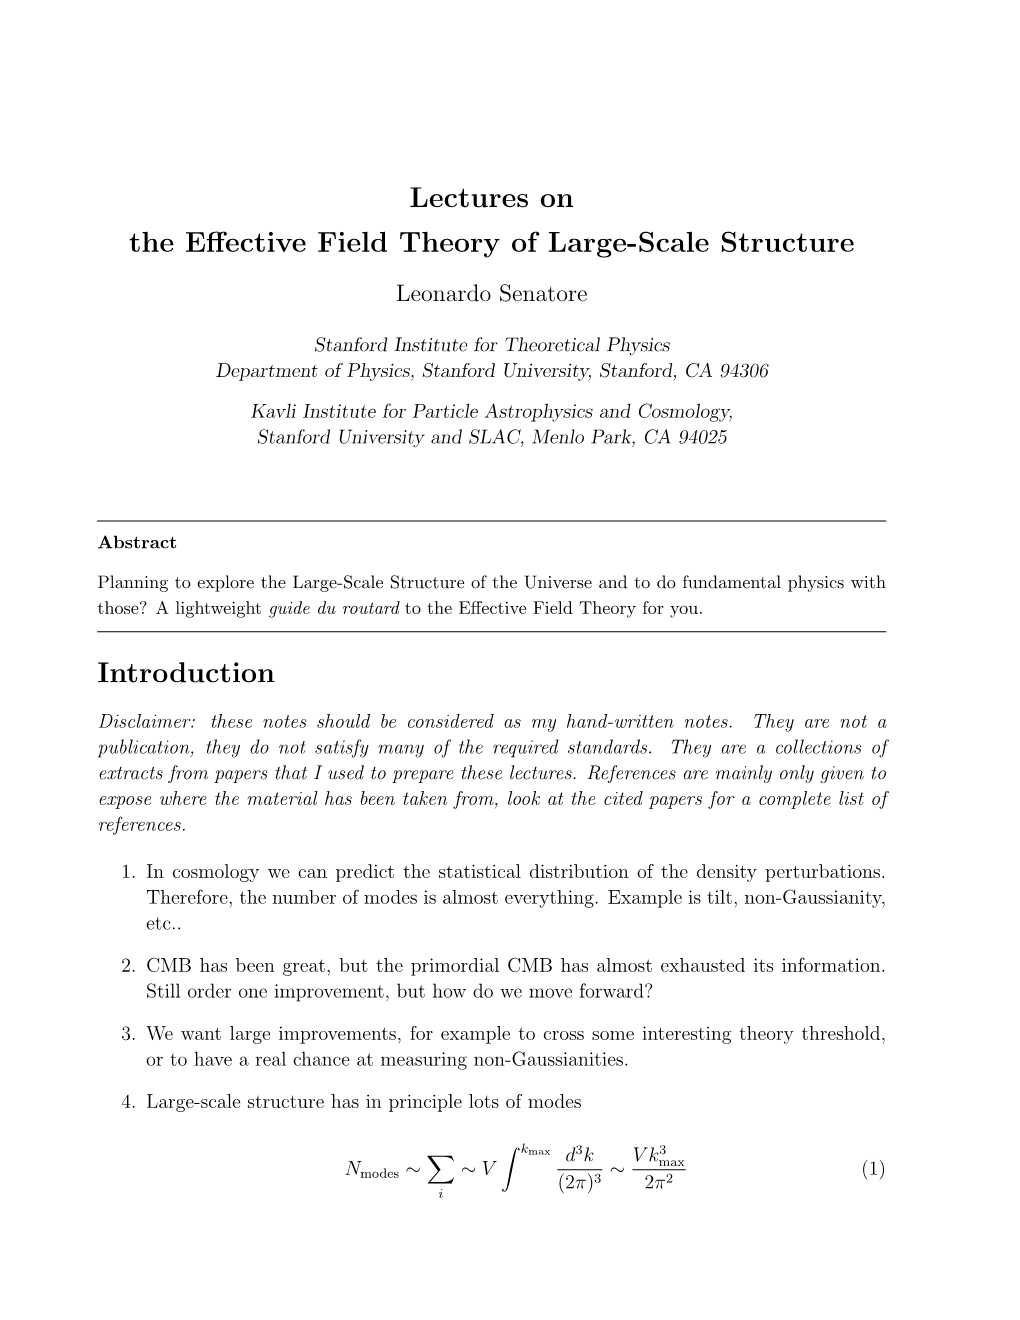 Lectures on the Effective Field Theory of Large-Scale Structure Introduction